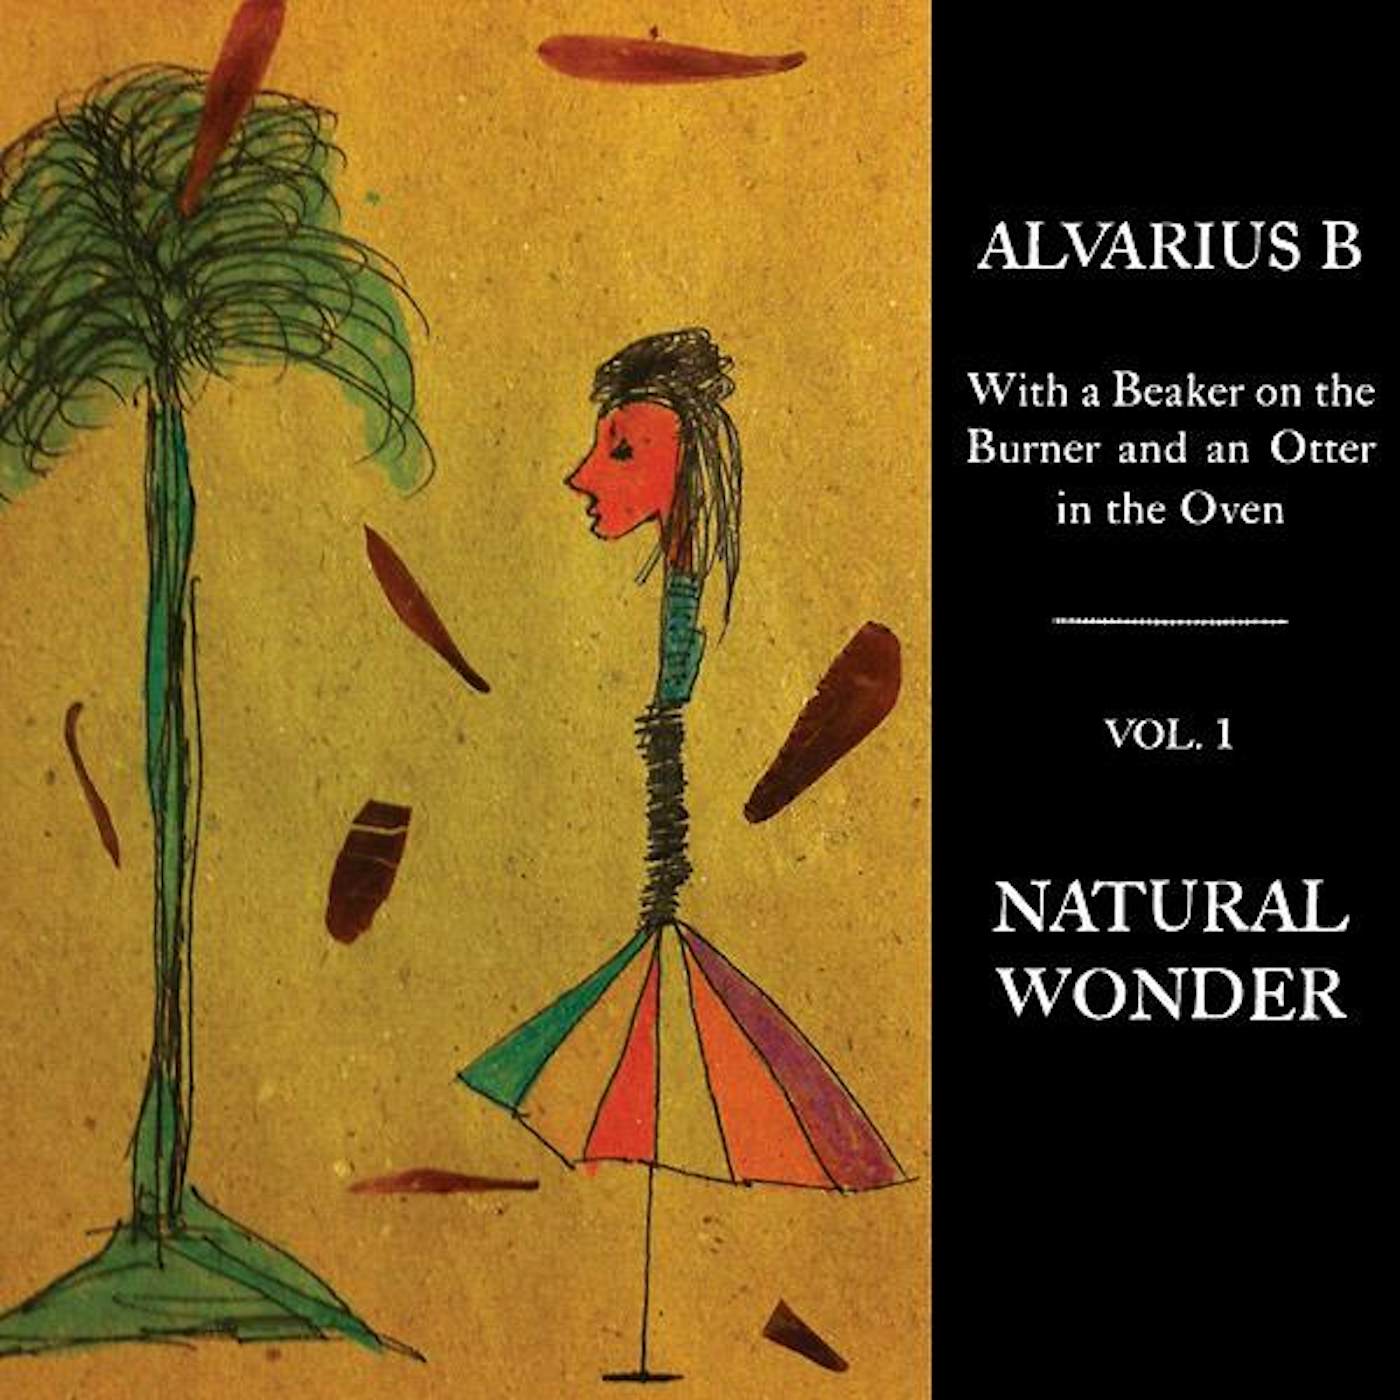 Alvarius B. 'With a Beaker on the Burner and an Otter in the Oven - Vol. 1 Natural Wonder' Viny LP Vinyl Record